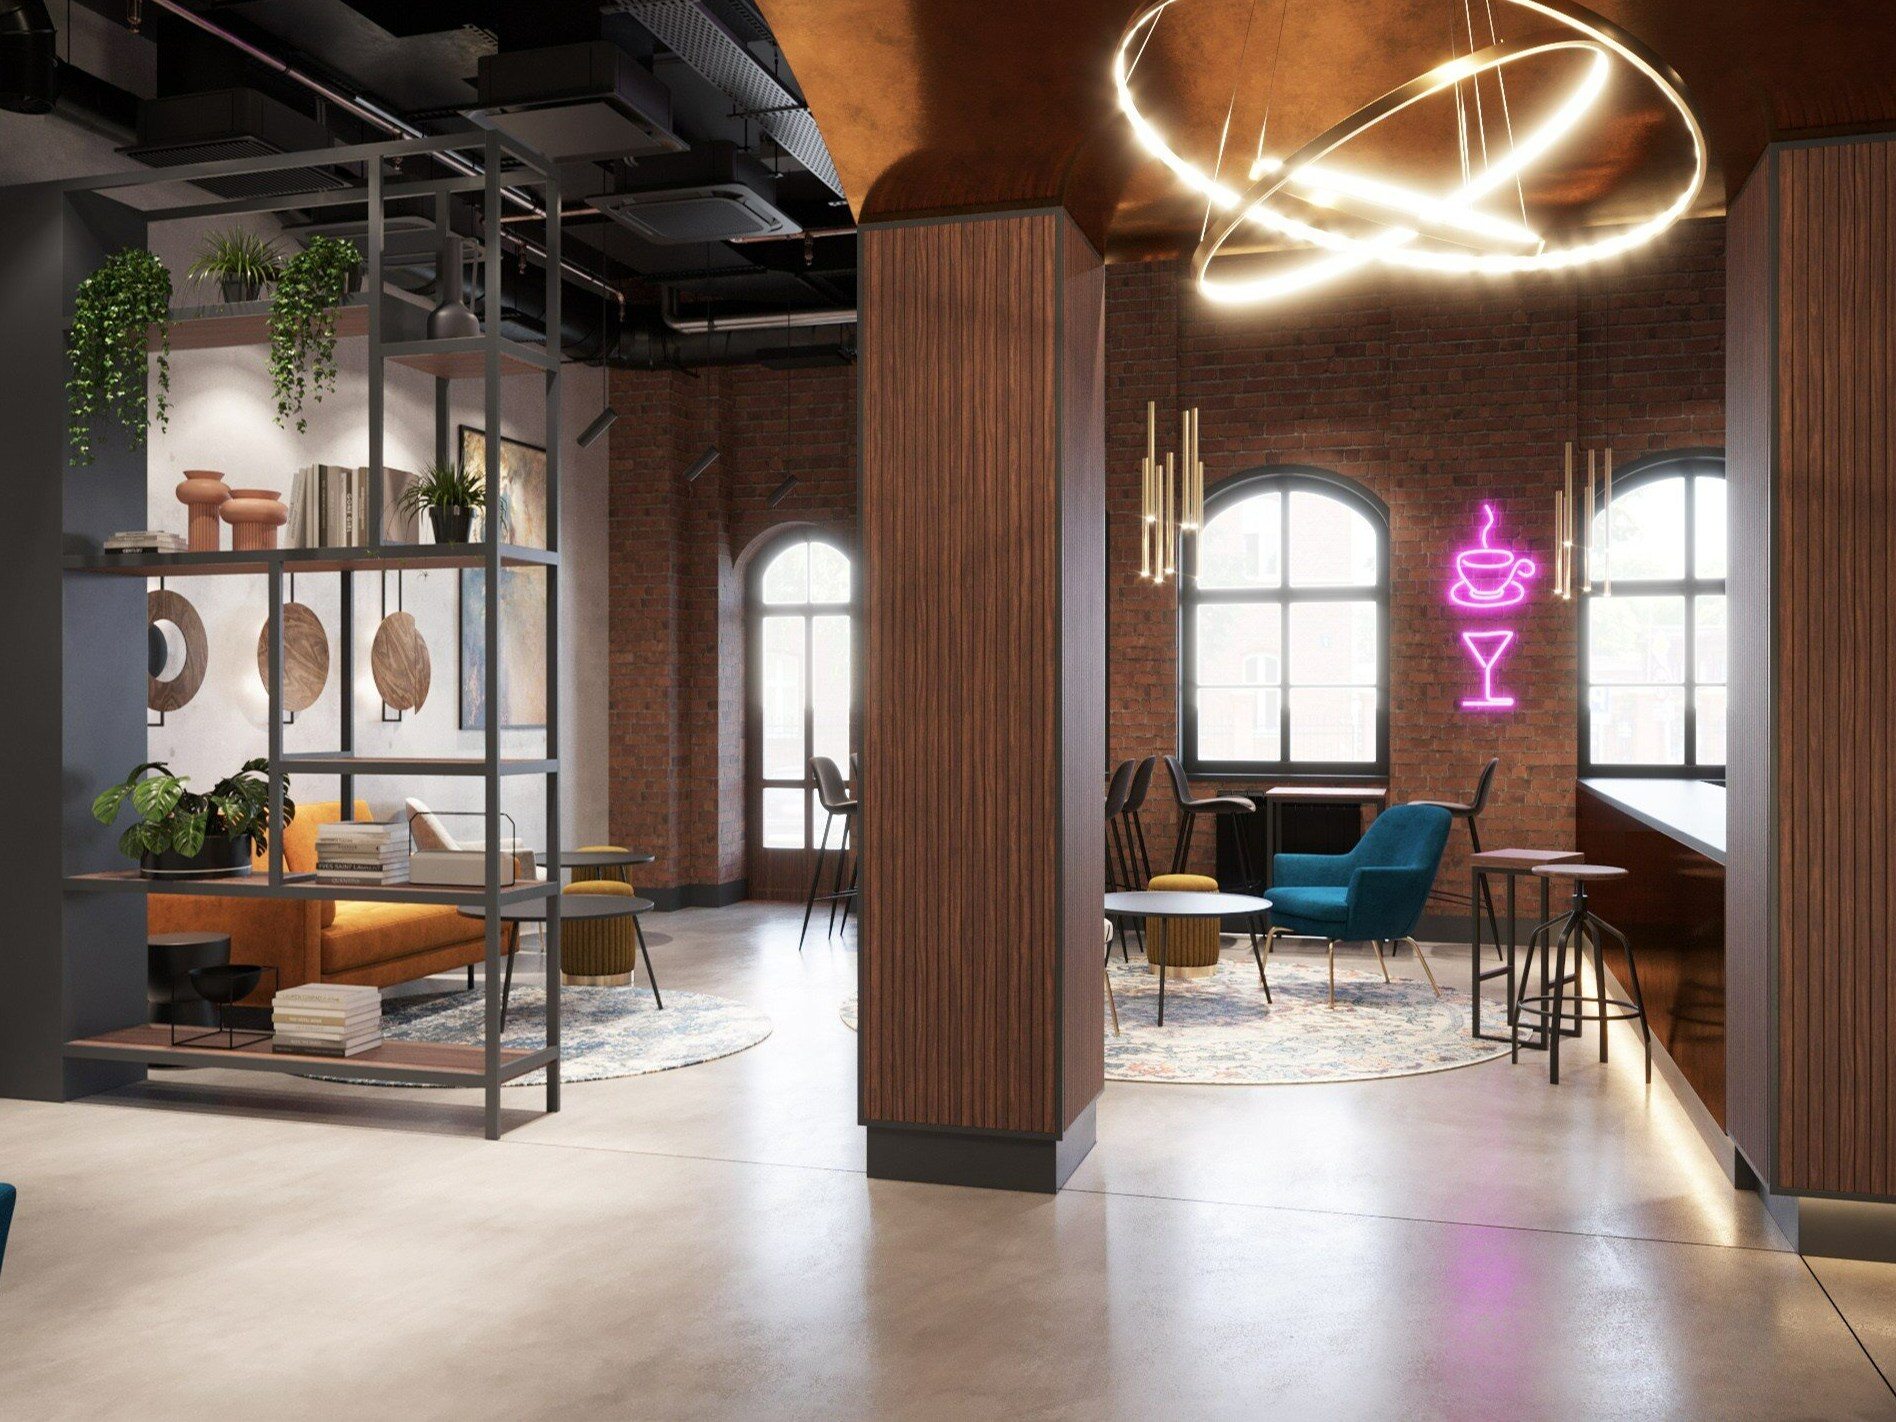 Hello, rest is on the horizon!  New Polish hotel chain